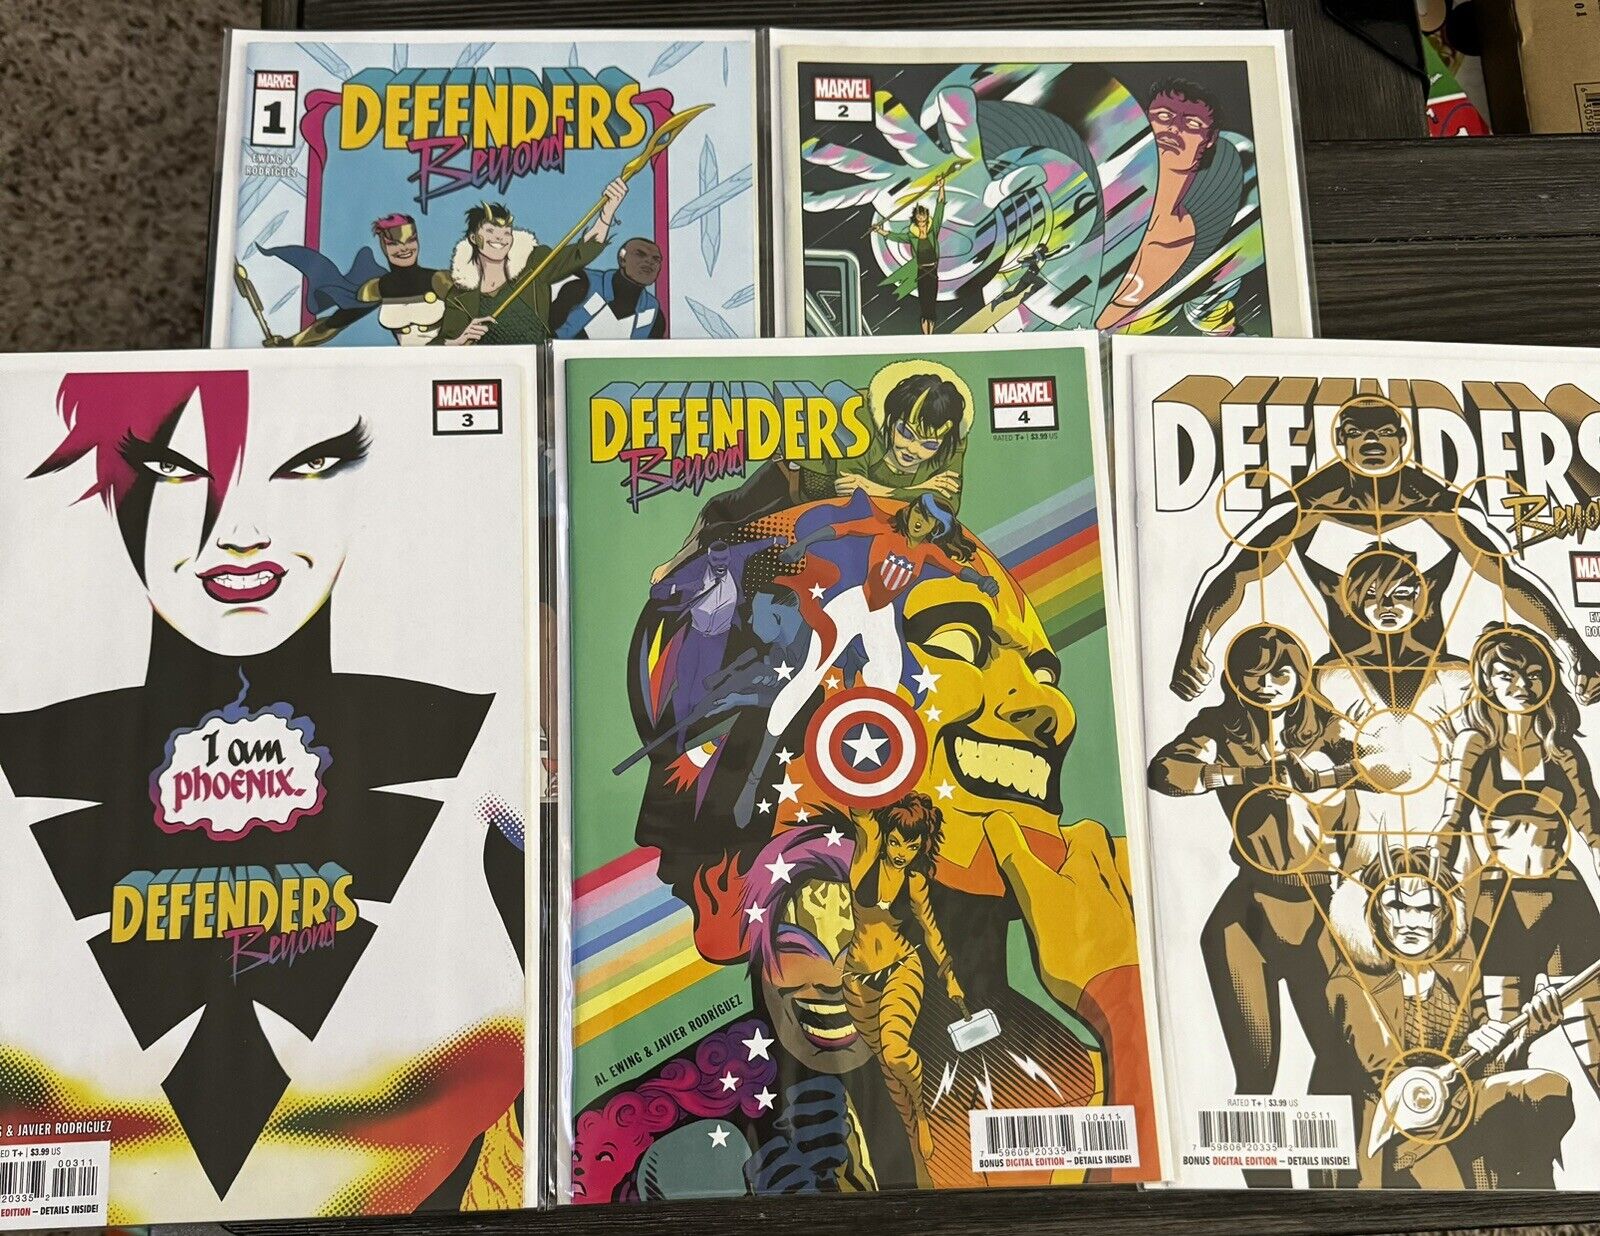 Defenders Beyond 1-5 Complete Comic Set, Ewing & Rodriguez, Marvel Collection